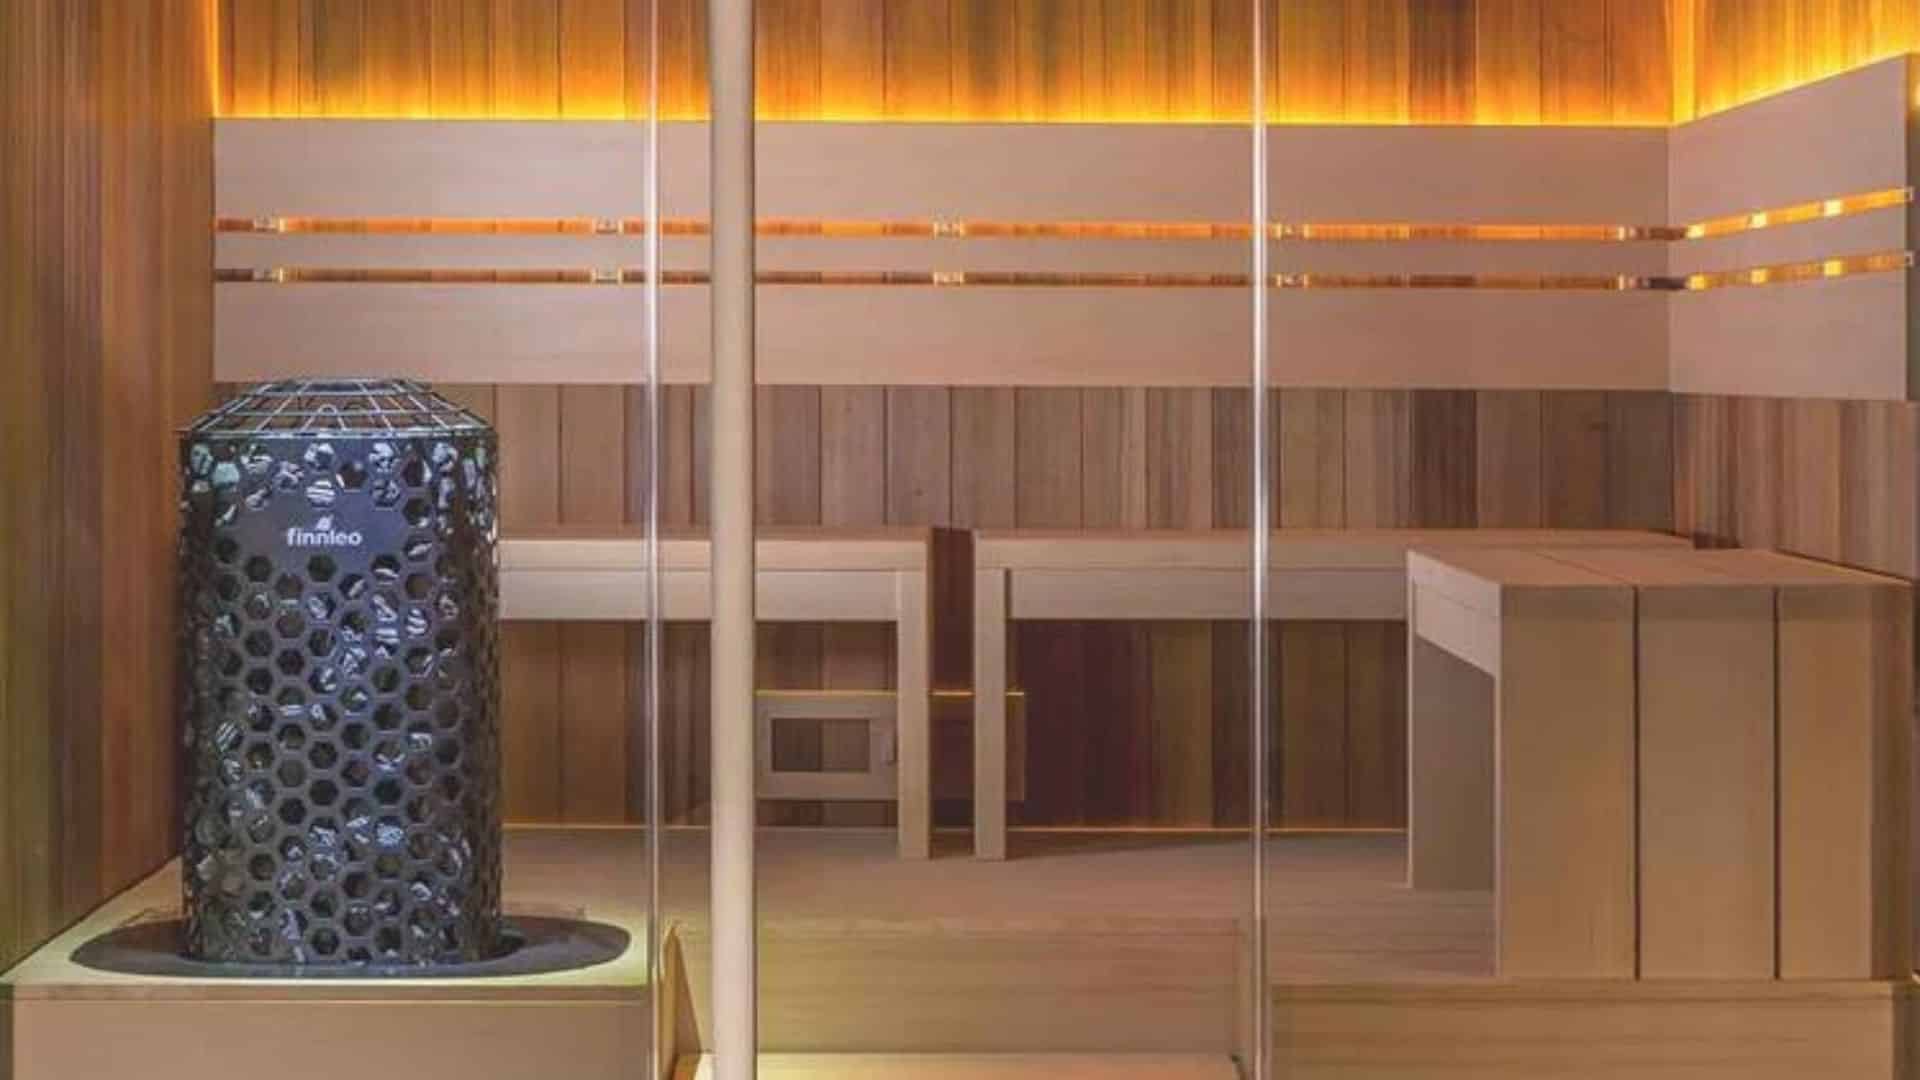 an image of a sauna, representing "the ultimate guide to sauna health benefits"